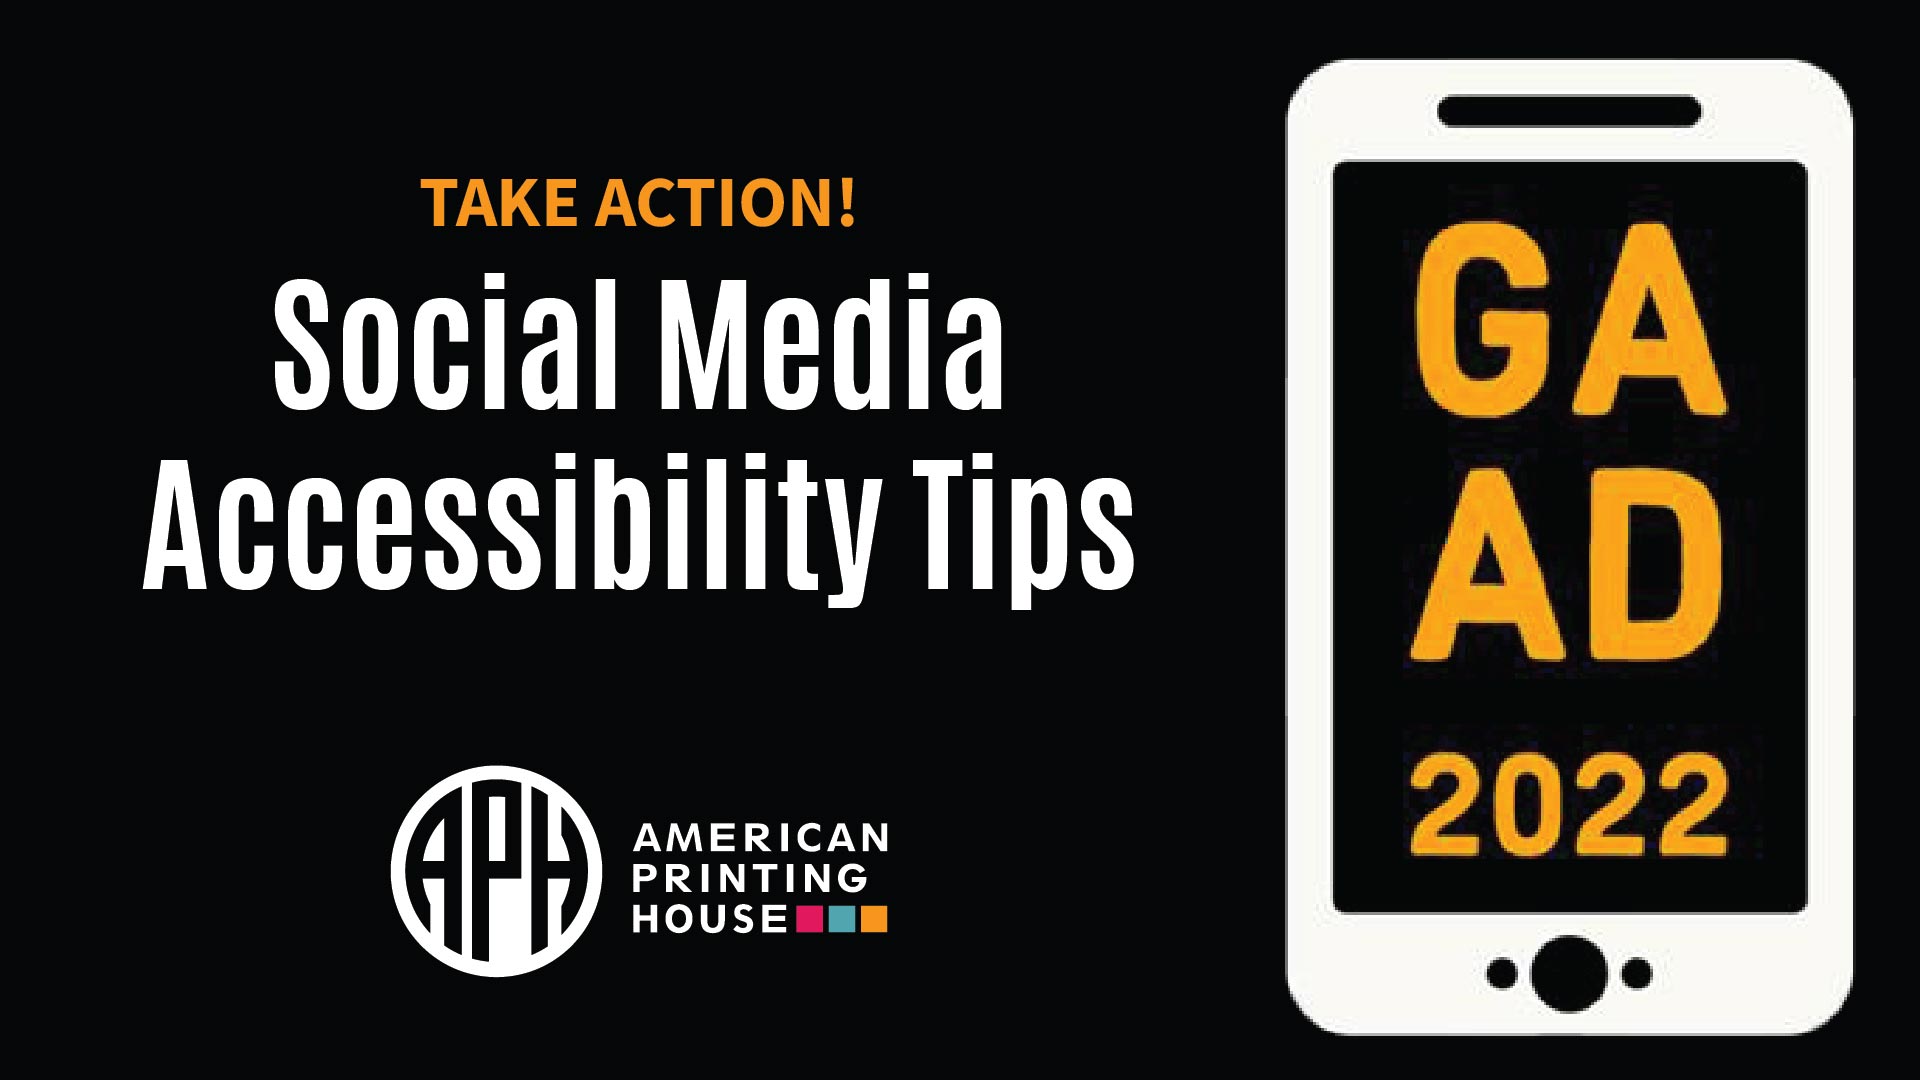 Text reads "Take action! Social Media Accessibility Tips" APH logo. Graphic of a cell phone with "GAAD 2022" on the screen.